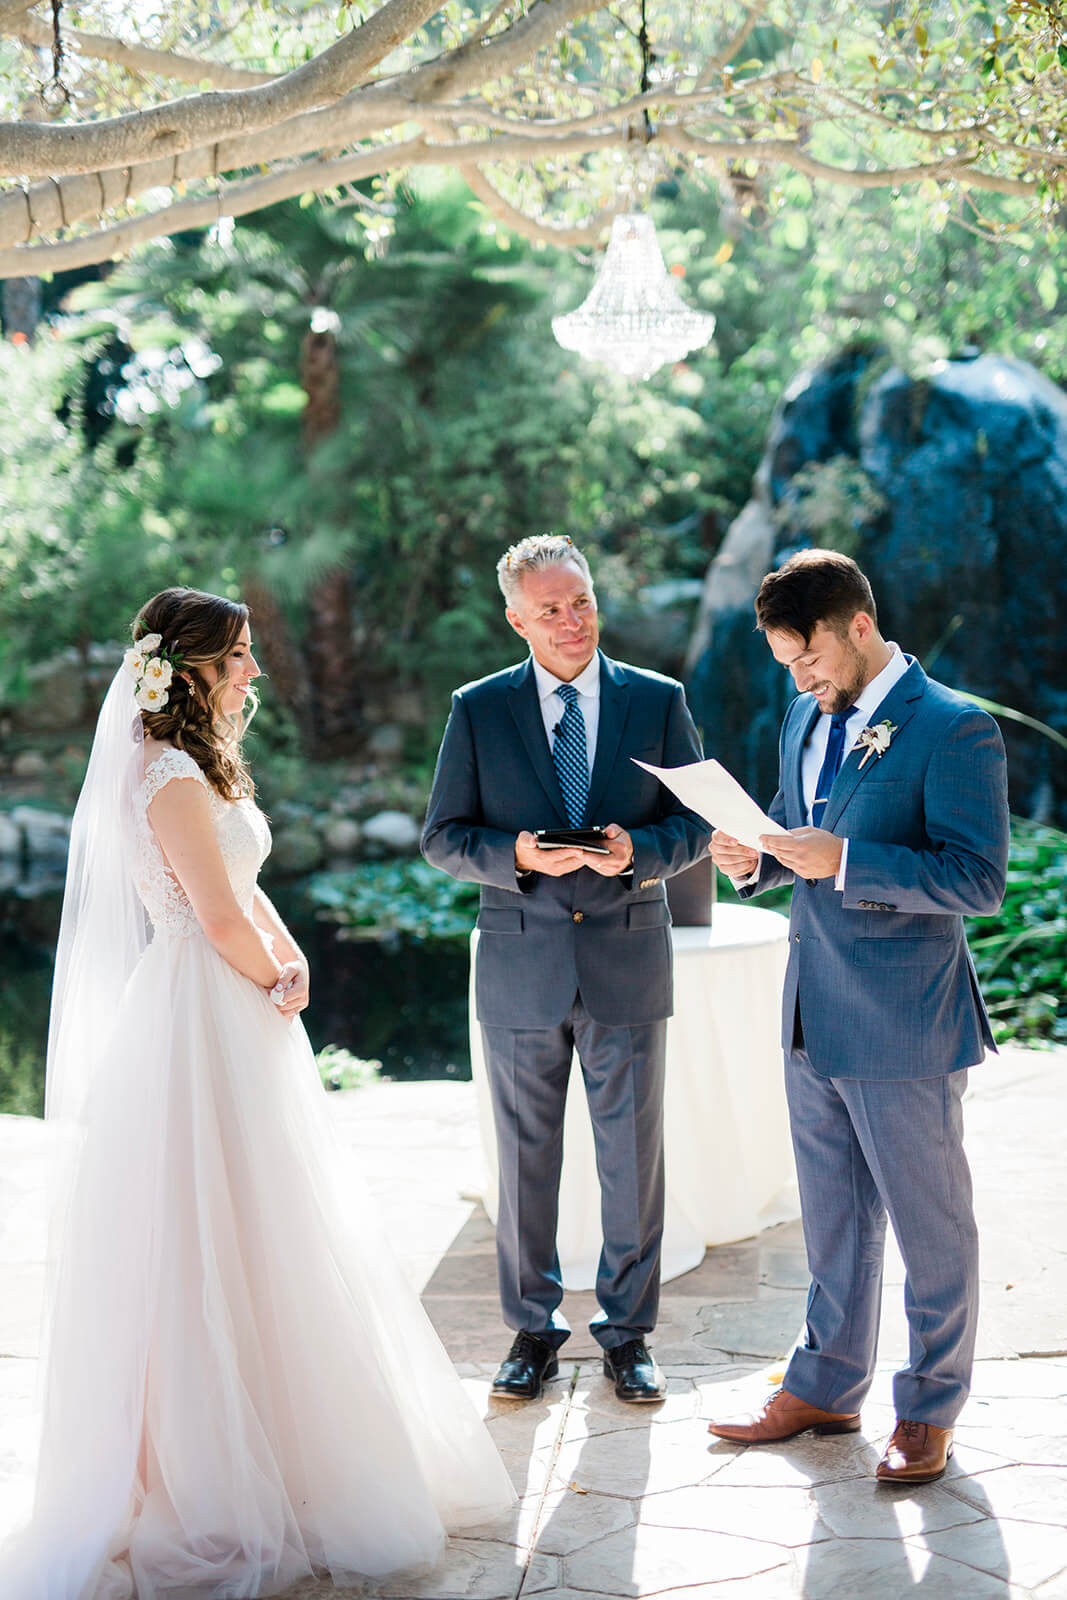 bride and groom, wedding photography, letter reading, ceremony